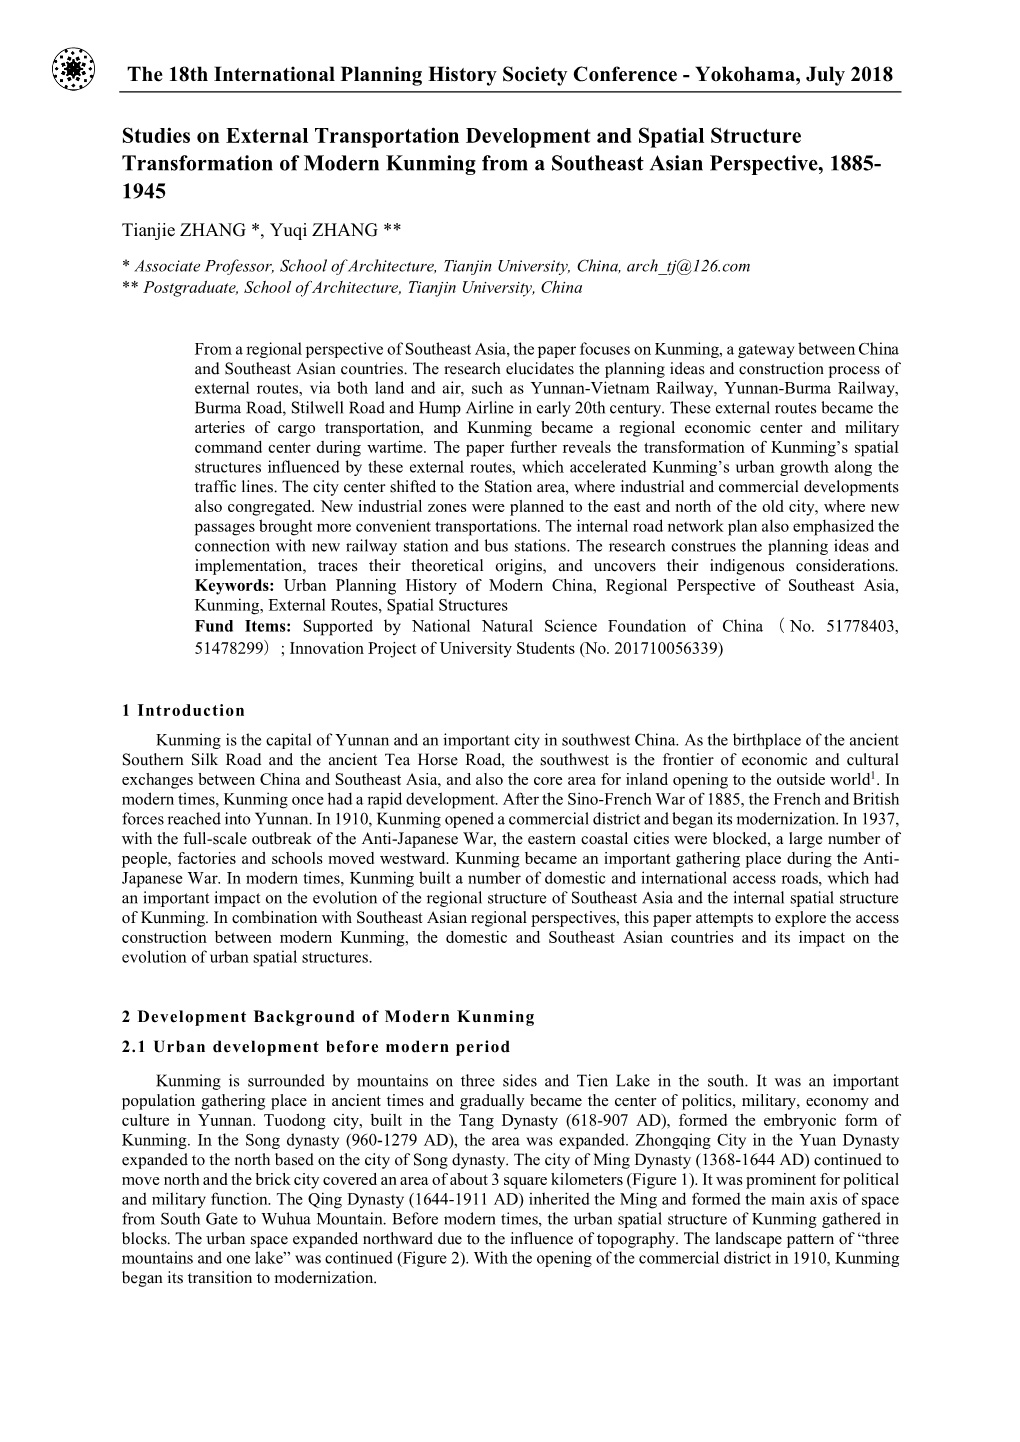 Studies on External Transportation Development and Spatial Structure Transformation of Modern Kunming from a Southeast Asian